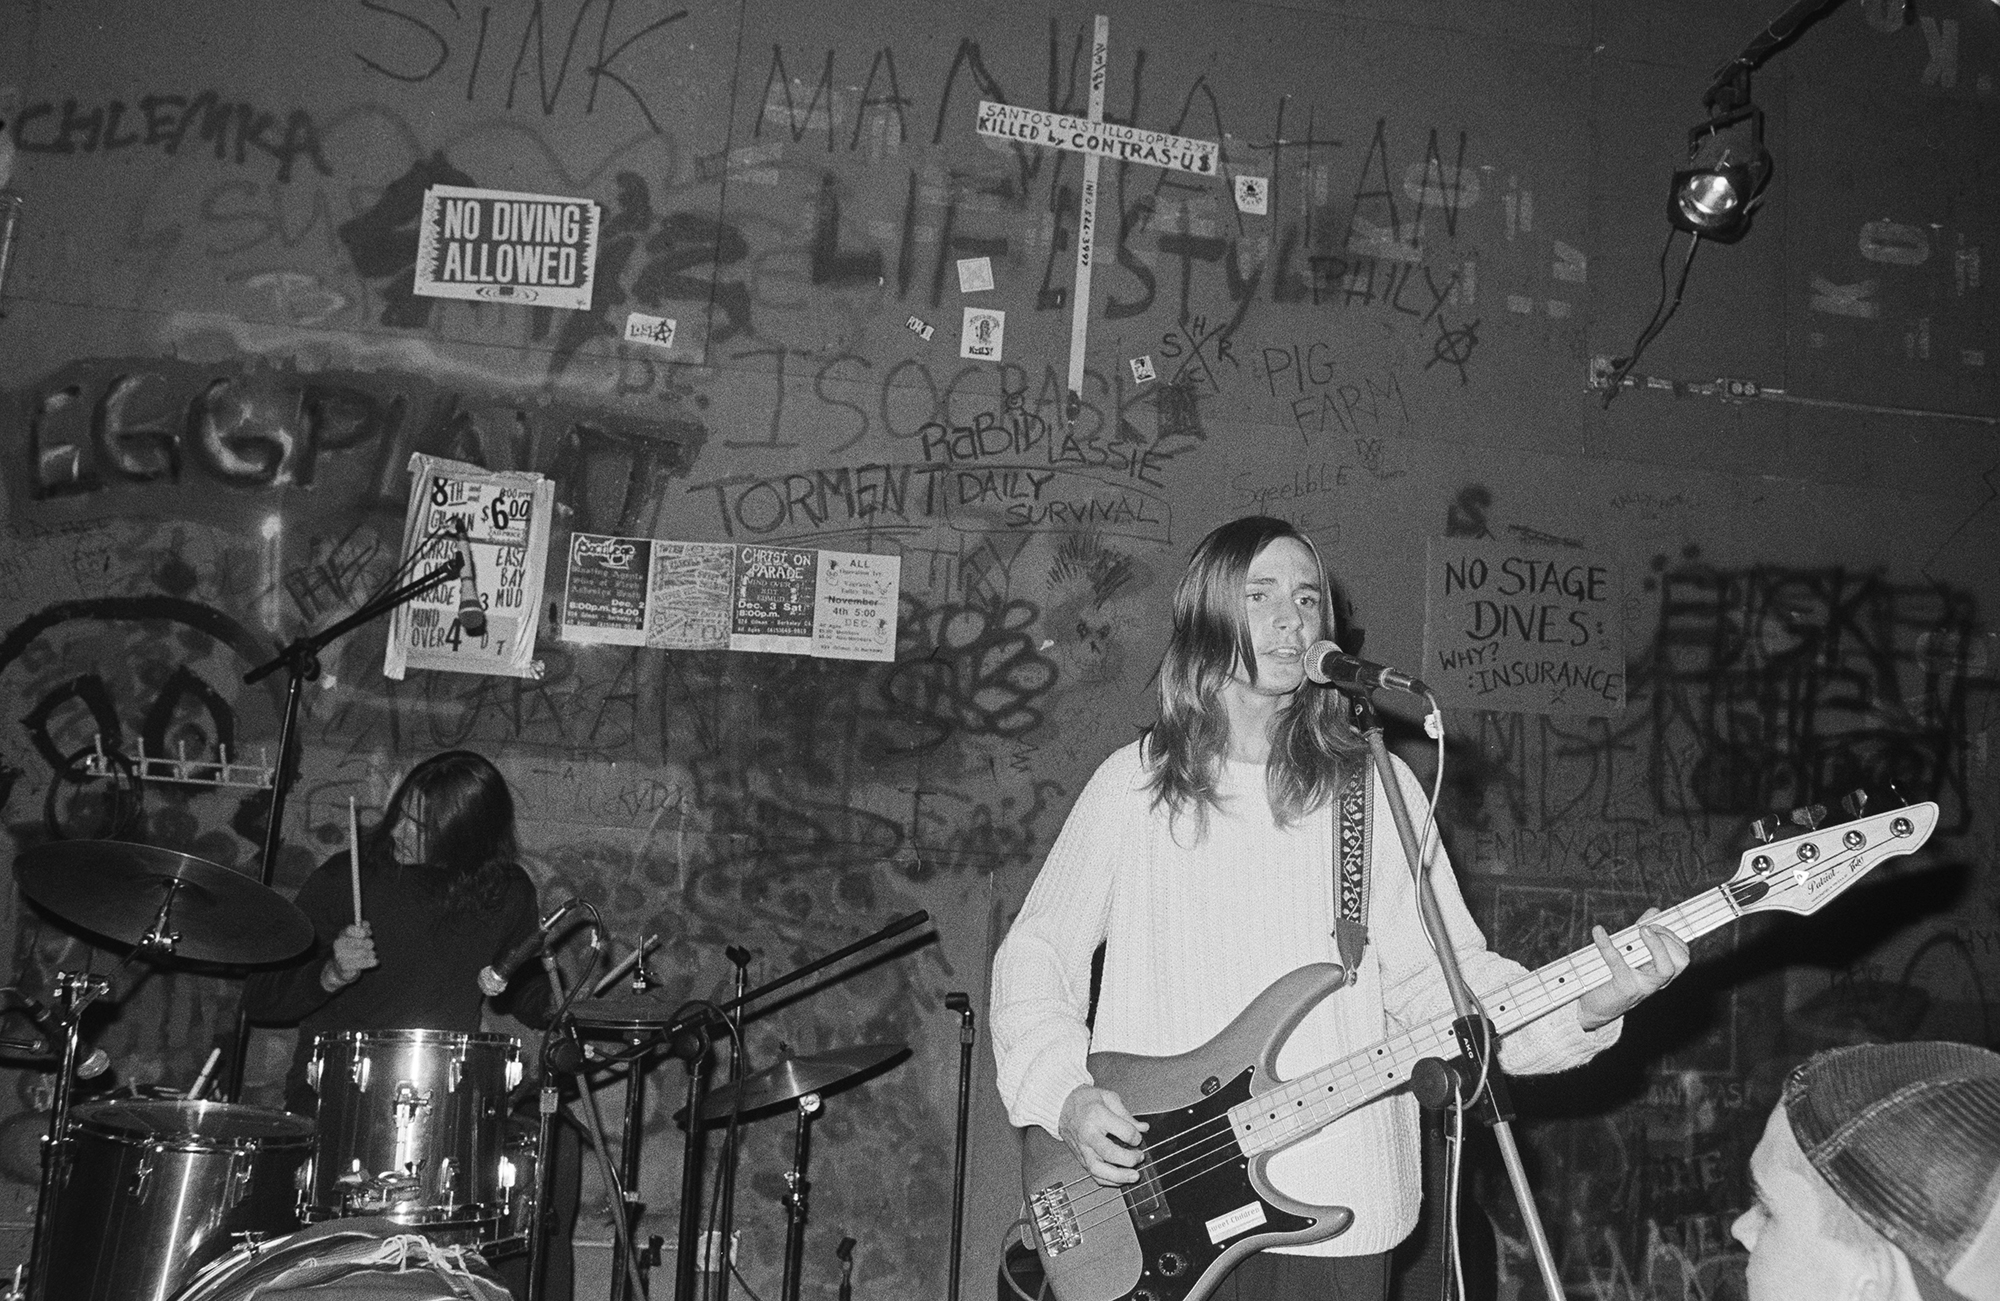 Green Day, then known as Sweet Children, perform at 924 Gilman Street on Nov. 26, 1988 in Berkeley, Calif.